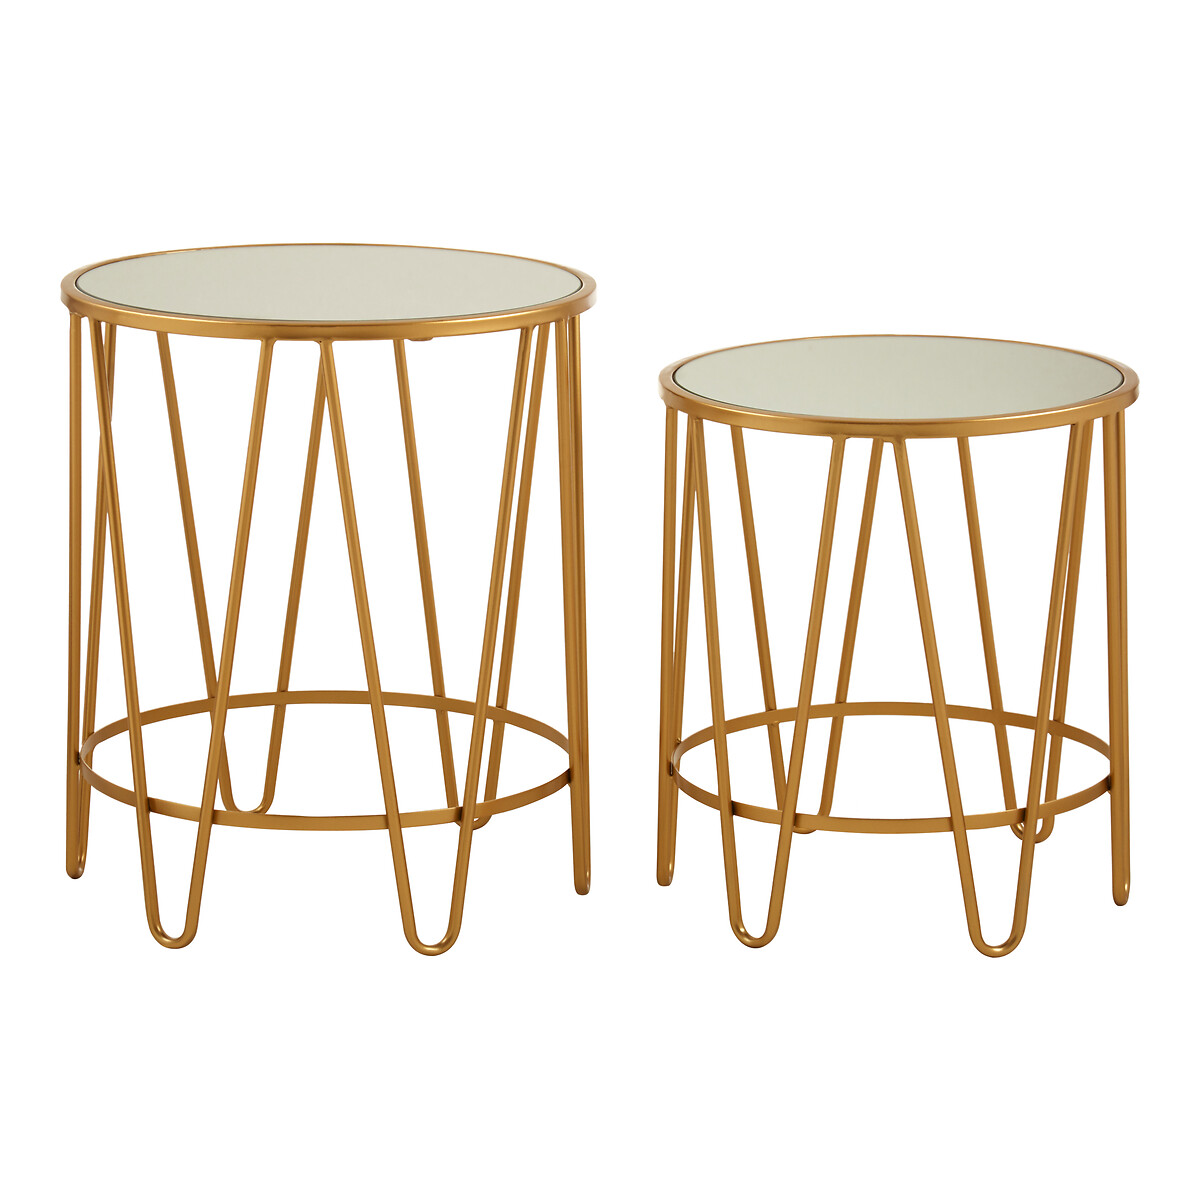 Set Of 2 Round Side Tables With Mirror, Mirrored Side Table Set Of 2